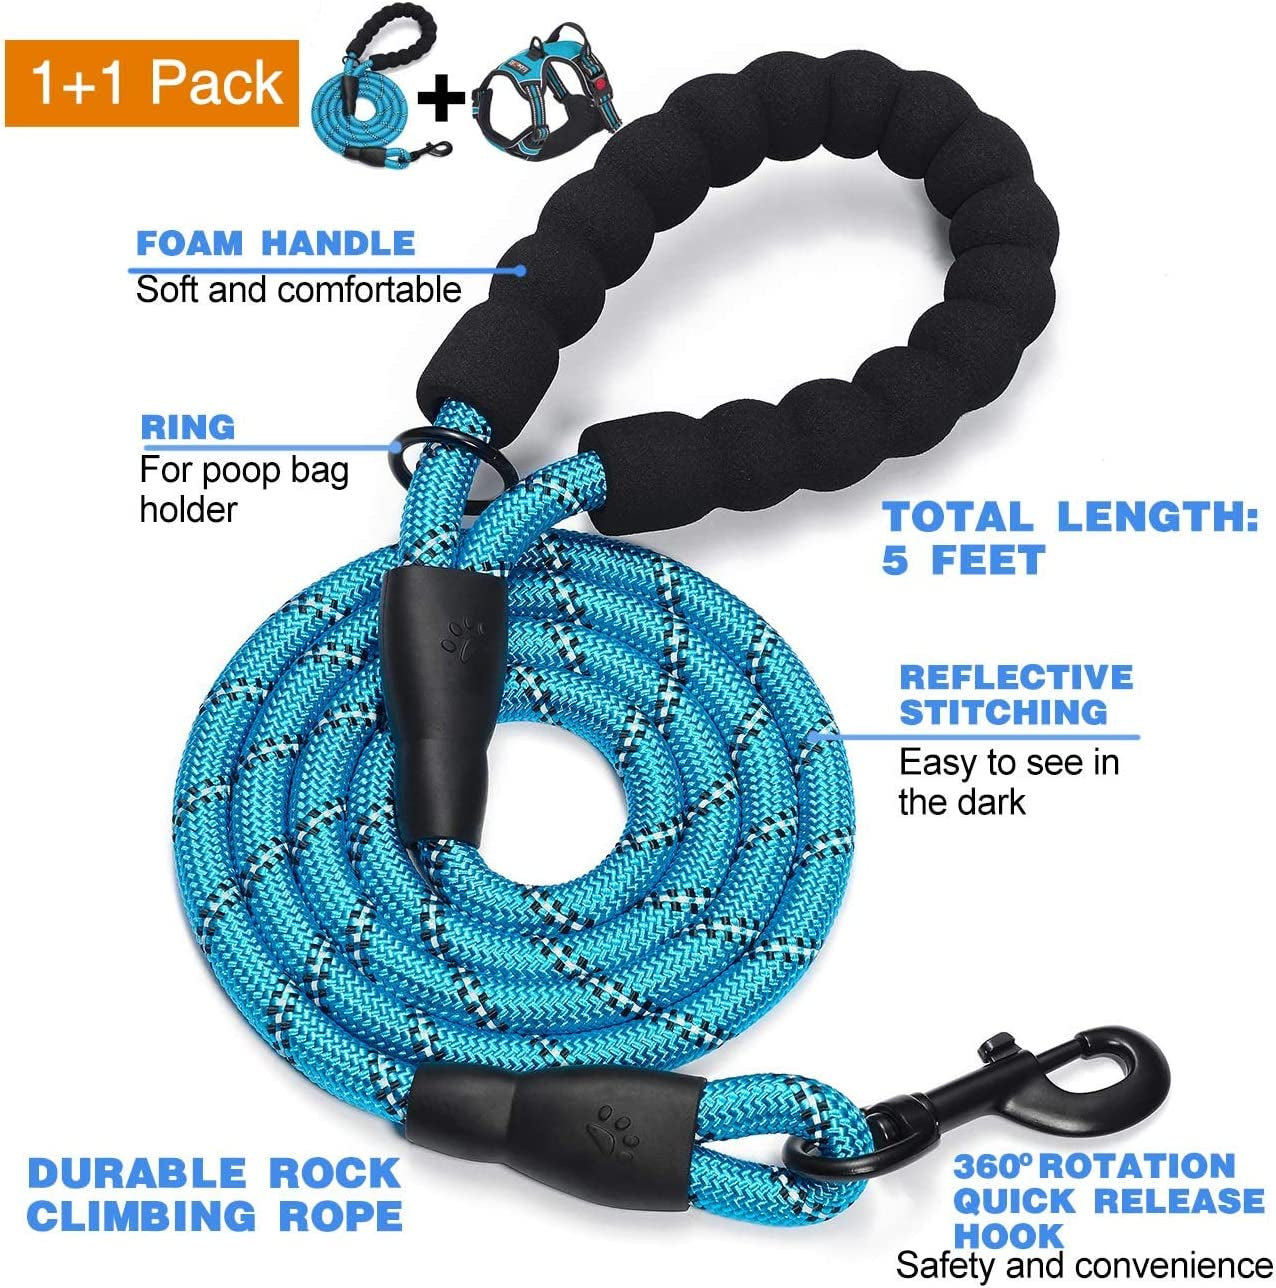 No Pull Dog Harness Adjustable Reflective Oxford Easy Control Medium Large Dog Harness with a Free Heavy Duty 5Ft Dog Leash (S (Neck: 13"-18", Chest: 17.5"-22"), Blue Harness+Leash)